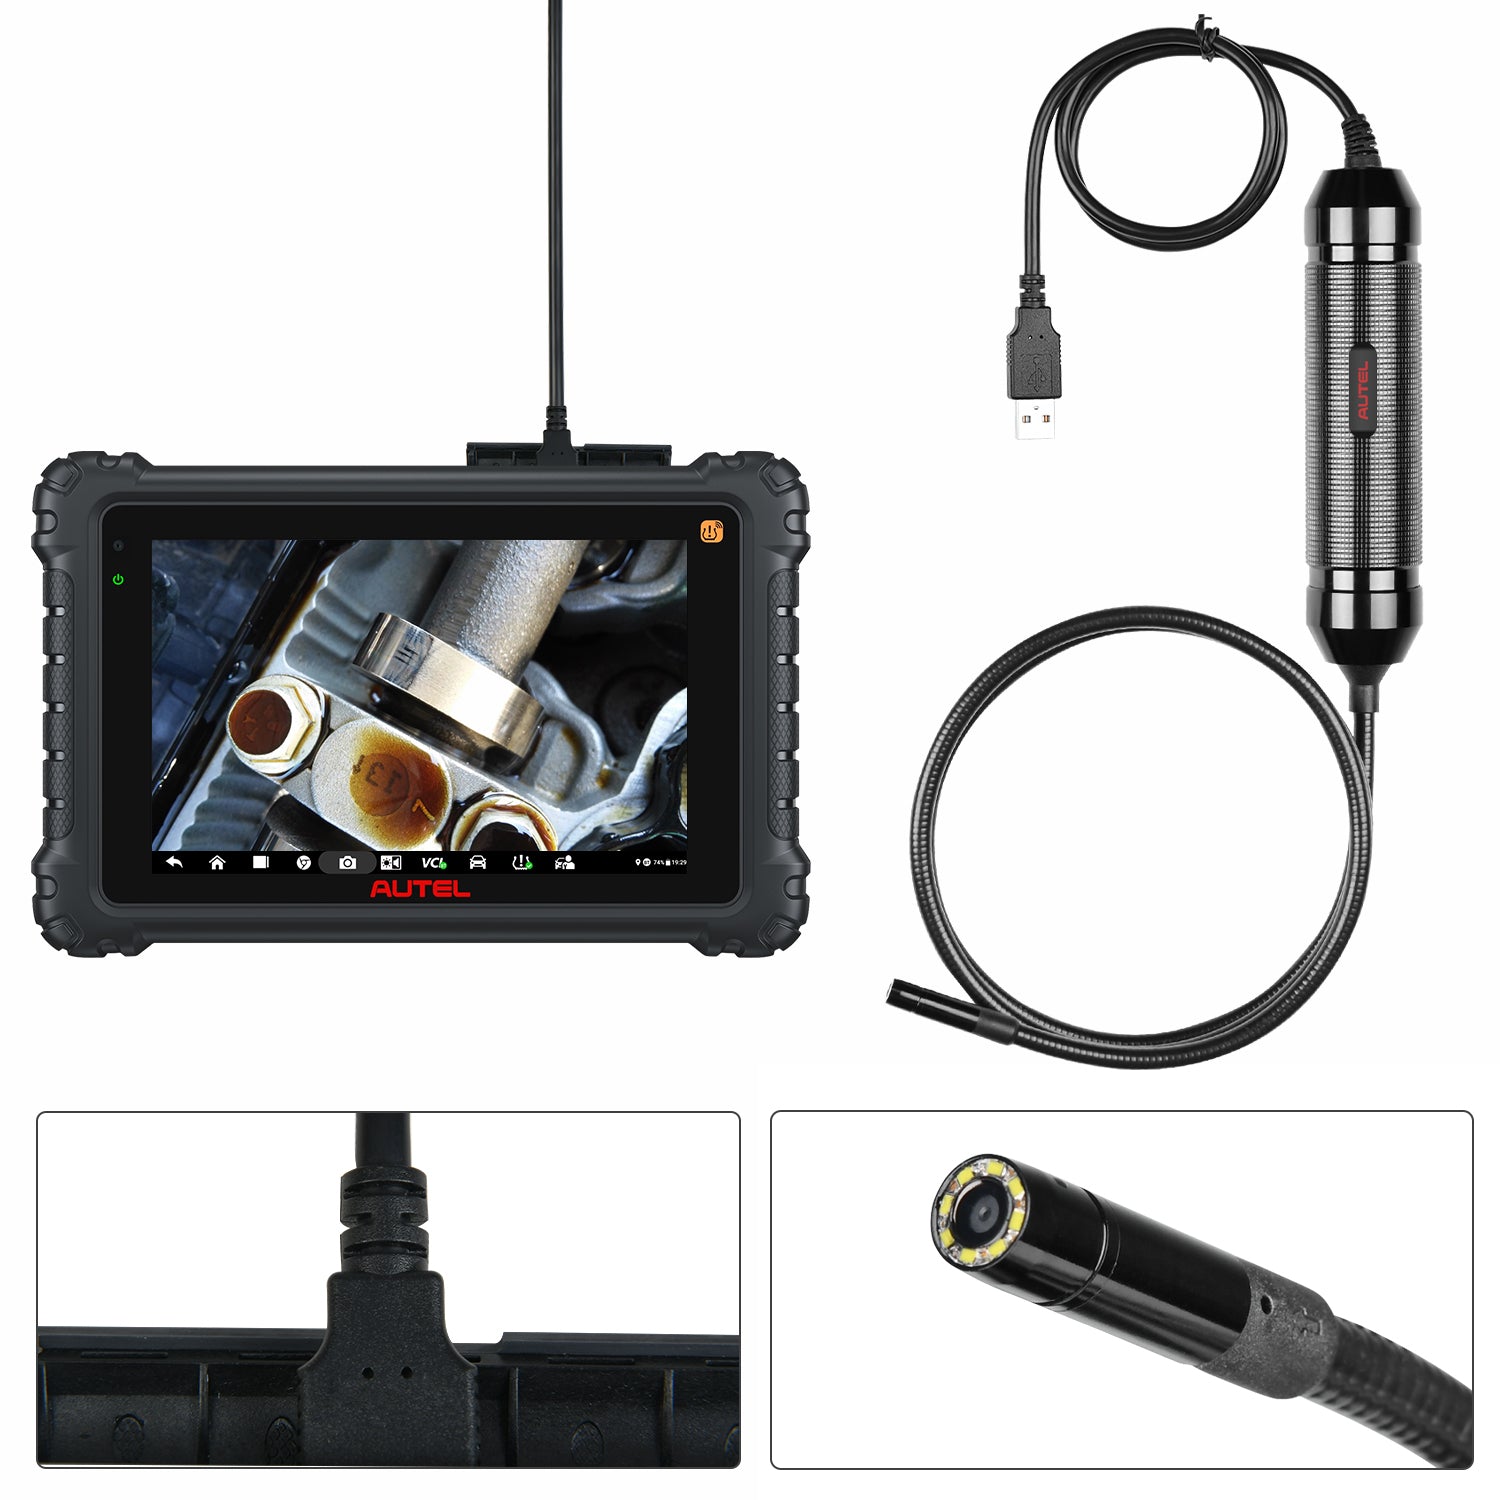 Autel MaxiVideo MV108S Auto Inspection Video Scope, 2023 Upgraded of MV108/ MV105 Digital Inspection Borescope, 2MP HD Camera, IP67 Waterproof USB Scope Camera with LED Light, Work with Autel Scanners